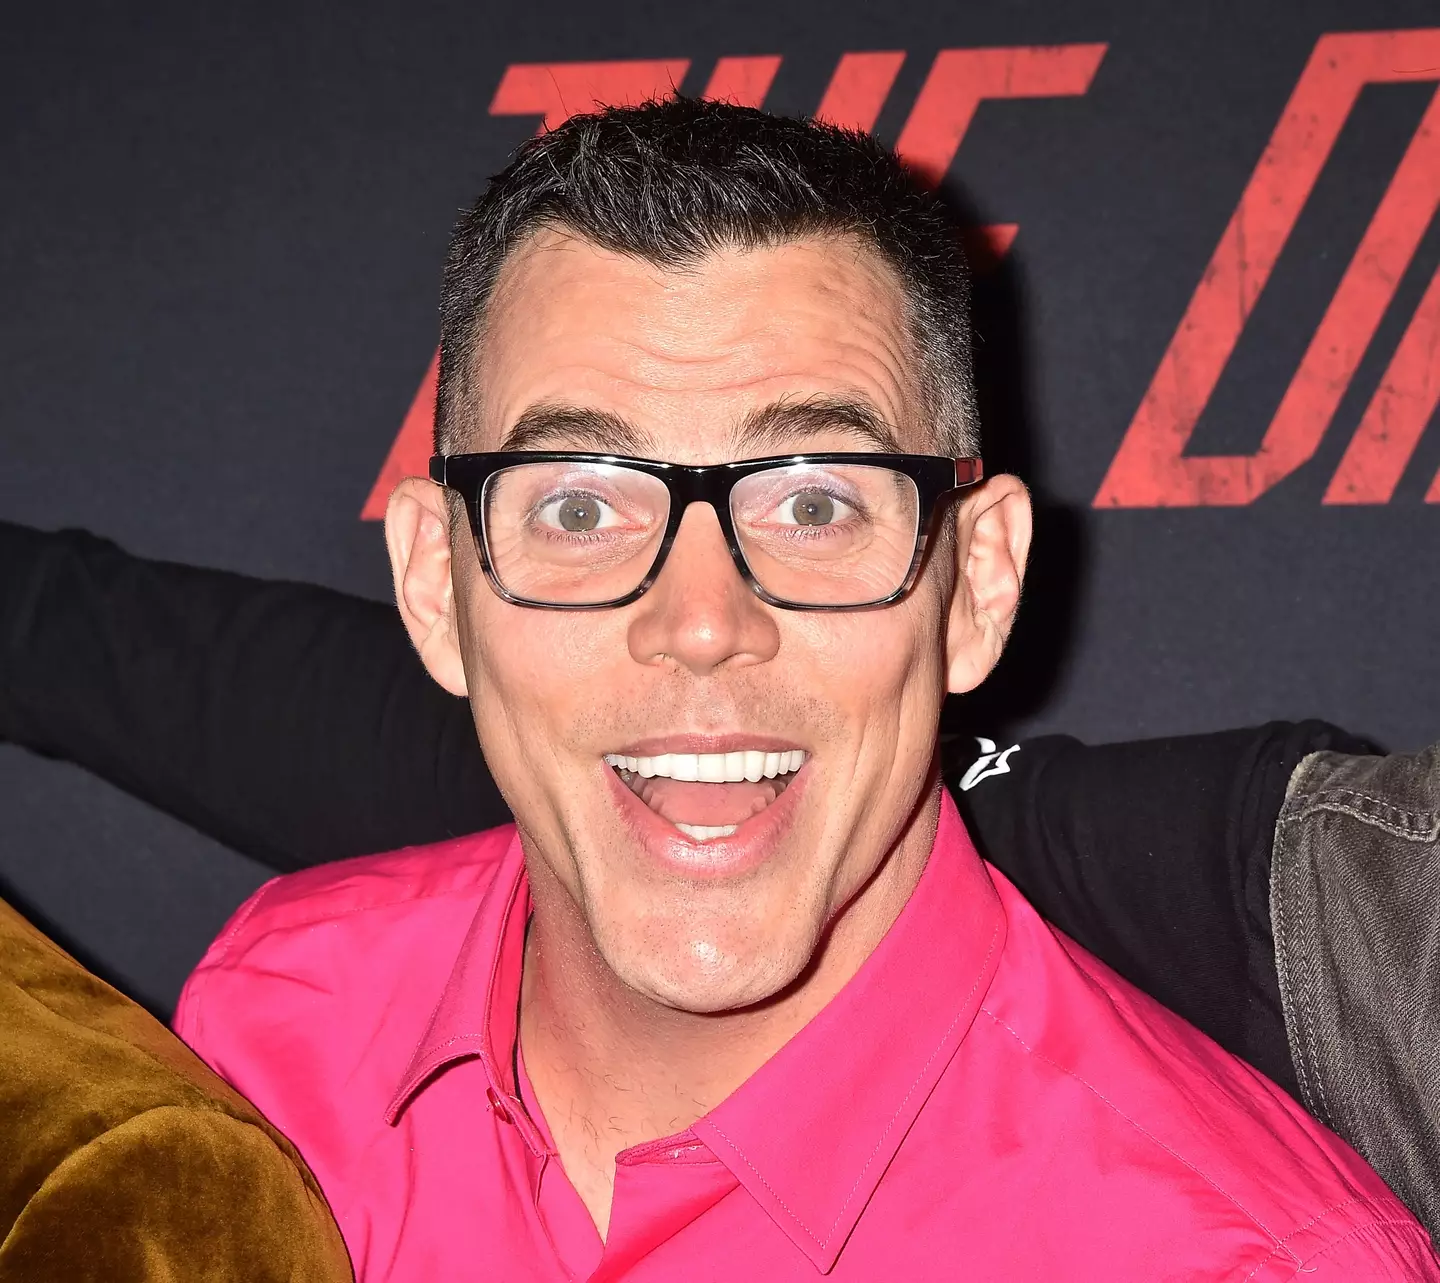 Steve-O feels like he's become 'way better than before' his struggles with alcohol.